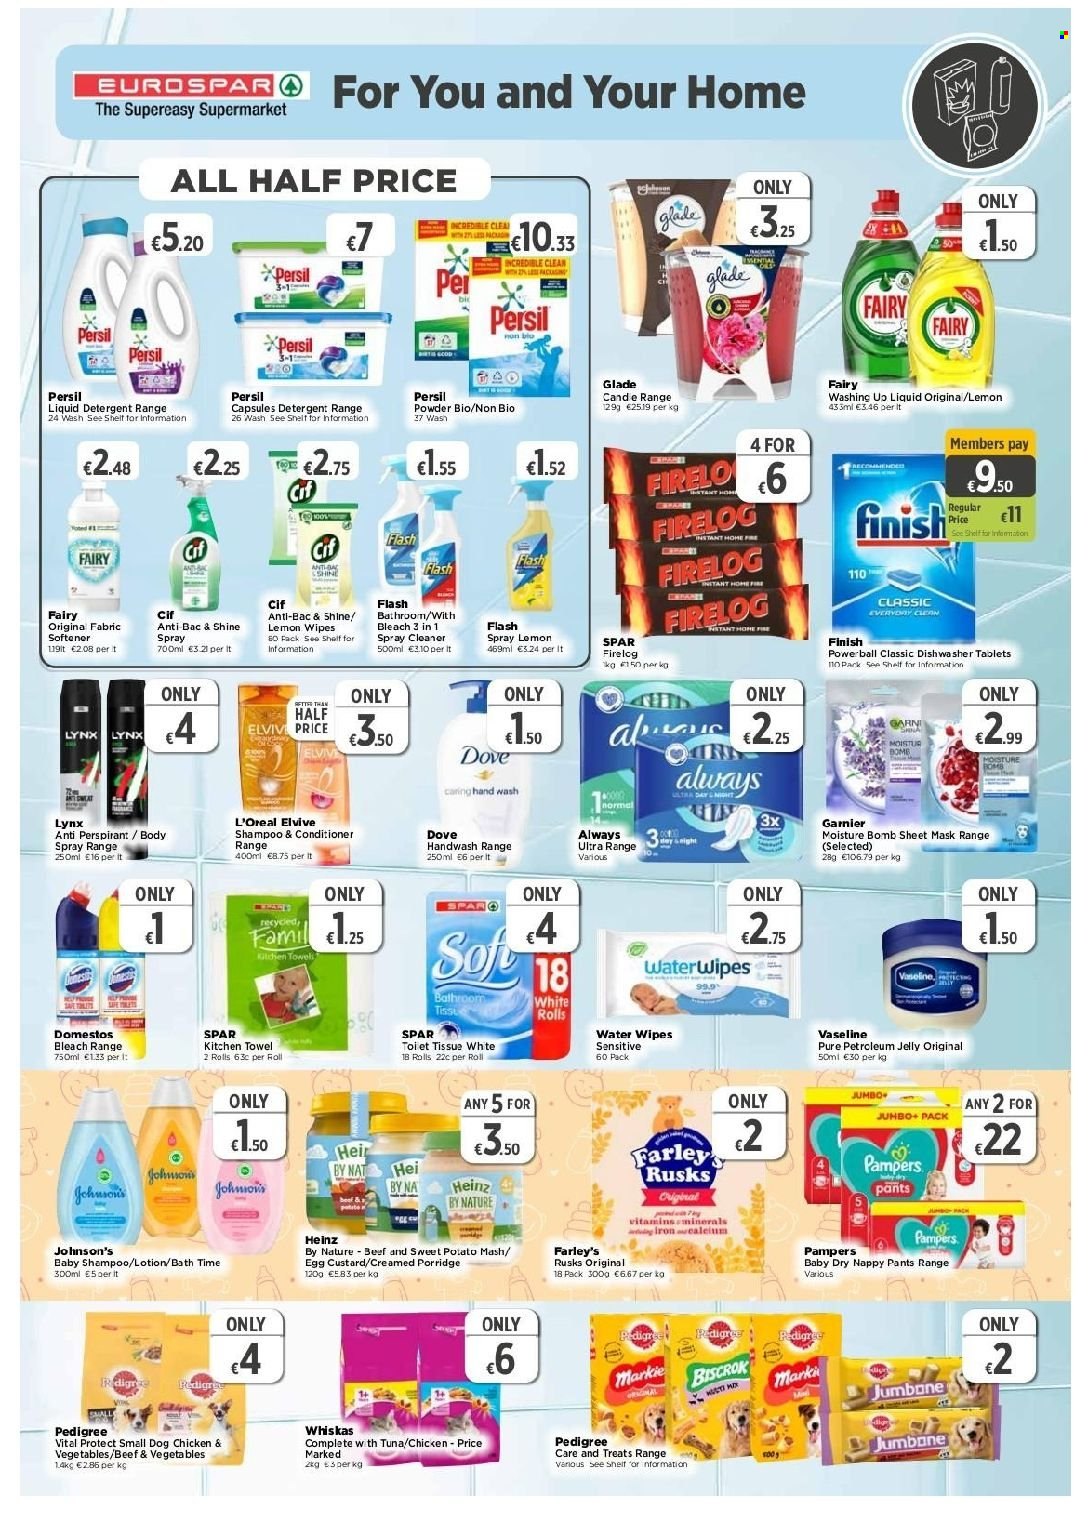 EUROSPAR offer  - 11.11.2021 - 1.12.2021 - Sales products - rusks, tuna, custard, eggs, jelly, Heinz, porridge, wipes, Pampers, pants, nappies, Johnson's, Dove, tissues, kitchen towels, detergent, Domestos, cleaner, bleach, Fairy, Cif, Persil, fabric softener, liquid detergent, dishwasher cleaner, dishwasher tablets, shampoo, hand wash, Vaseline, Garnier, L’Oréal, conditioner, body lotion, body spray, Glade, Whiskas, Pedigree. Page 7.